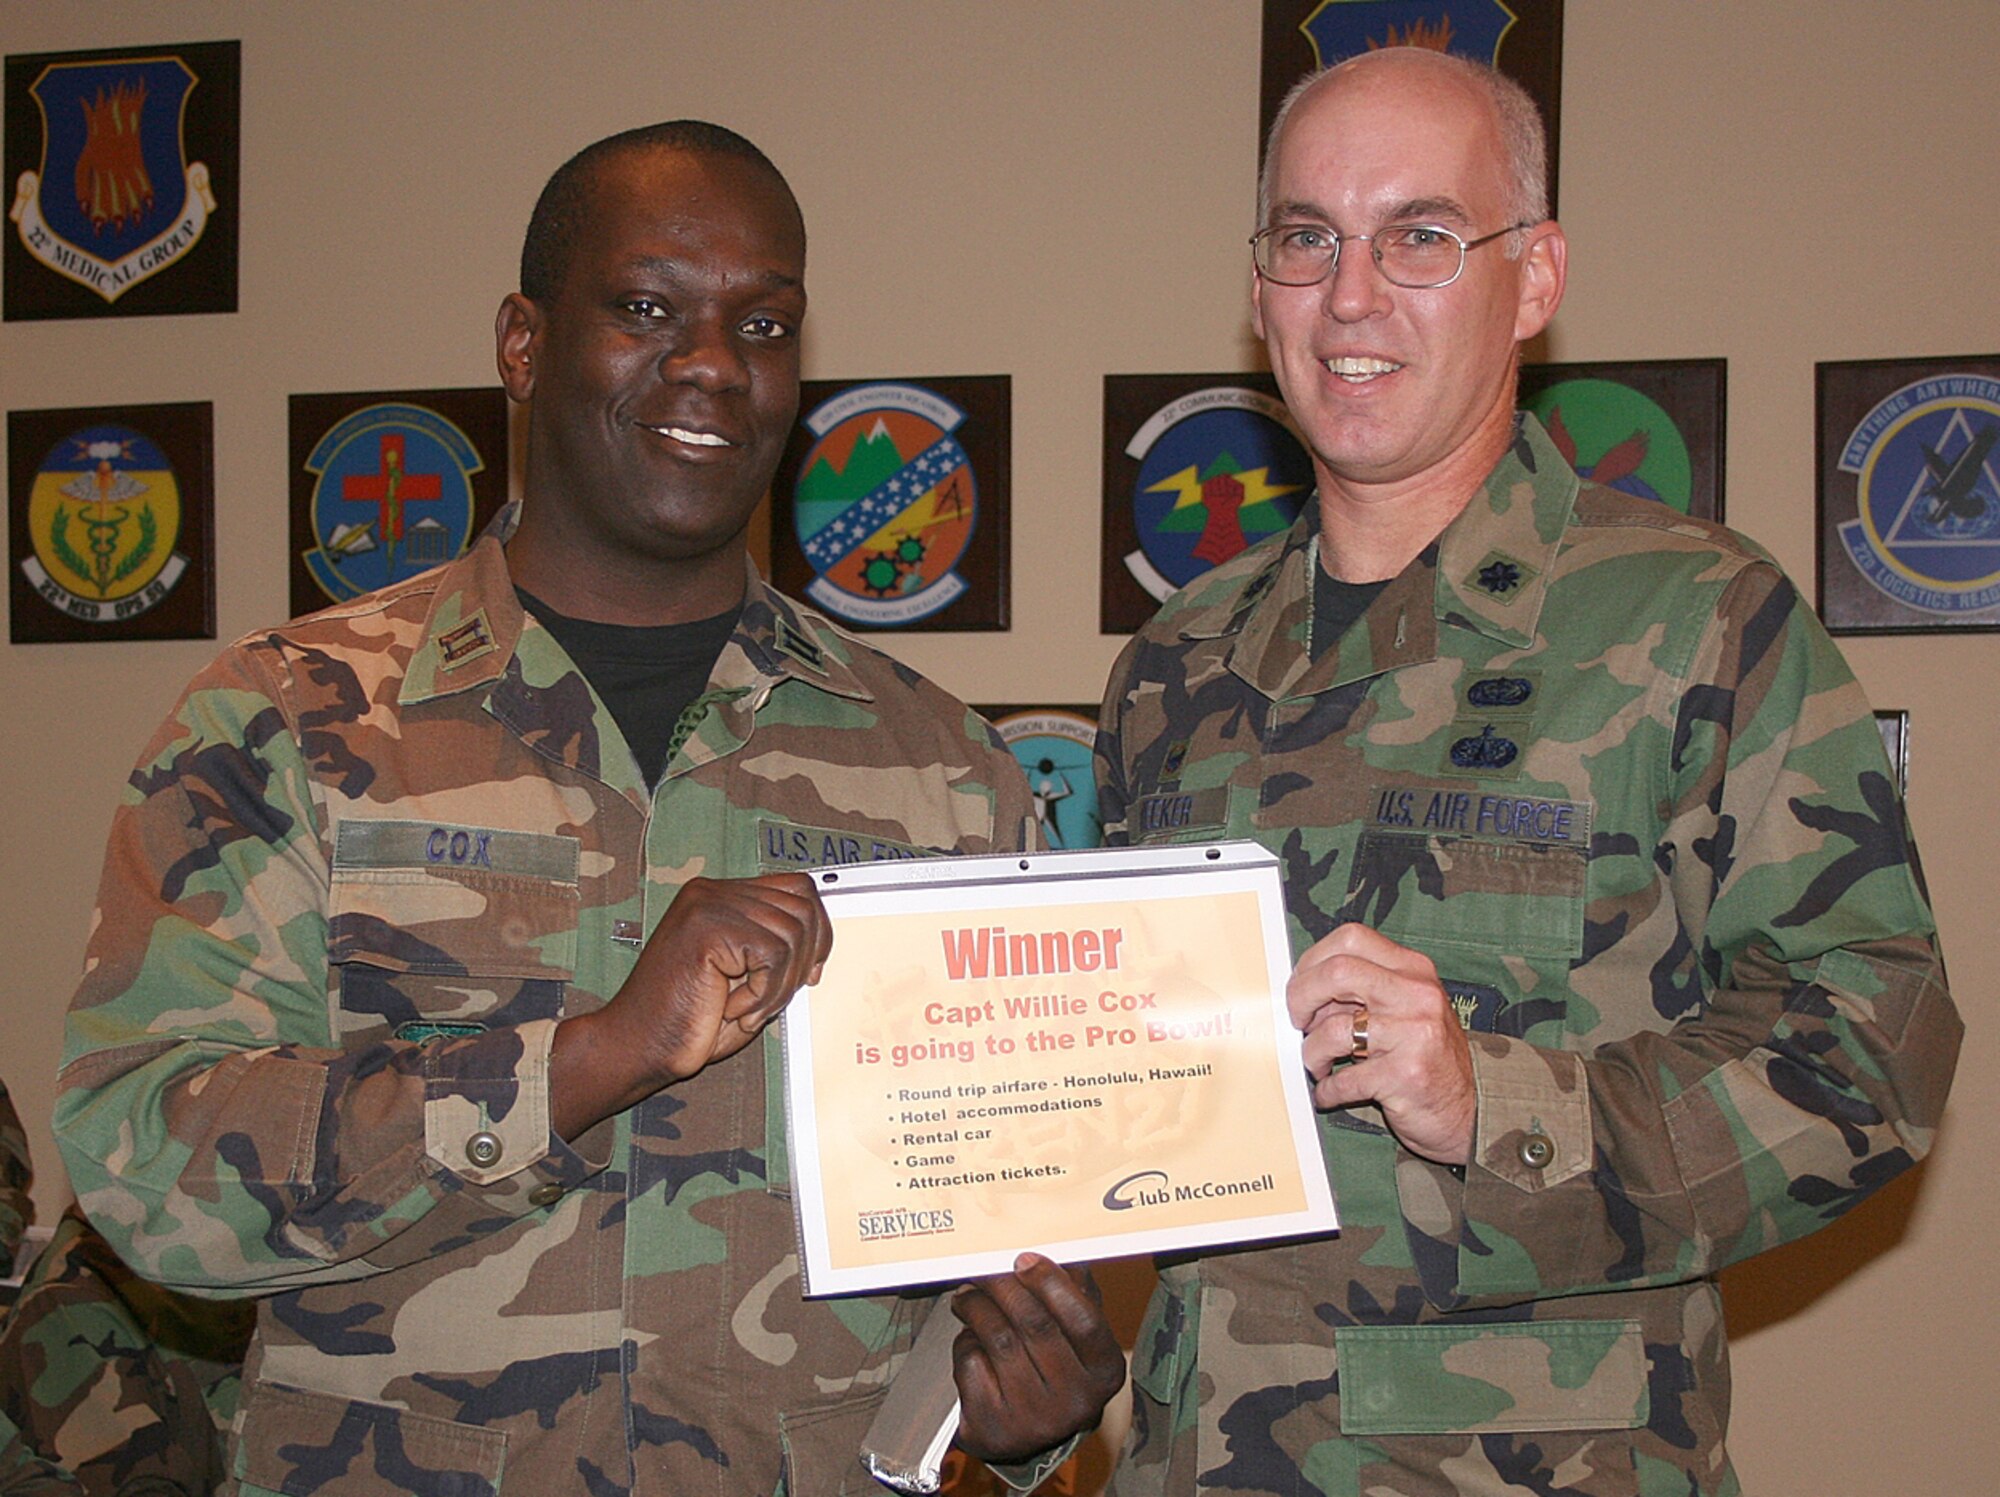 Lt. Col. Scott Meeker, right, 22nd Services Squadron commander, hands Capt. Willie Cox, 22nd Logistics Readiness Squadron, a certificate Dec. 21 awarding him two tickets to the National Football League’s Pro Bowl game, which will be played Feb. 10 in Honolulu, Hawaii. In addition to Pro Bowl tickets, Captain Cox won an all-expenses-paid, six-day, five-night trip for two to Hawaii, including round trip airfare, hotel accommodations, a rental car and tickets to local attractions, courtesy of the Air Force’s Football Frenzy program. The program offers club members opportunities to win prizes ranging from T-shirts to Super Bowl tickets by watching games at their local base clubs. (Photo by Petty Officer 2nd Class Troy Karr, 22nd ARW Public Affairs)